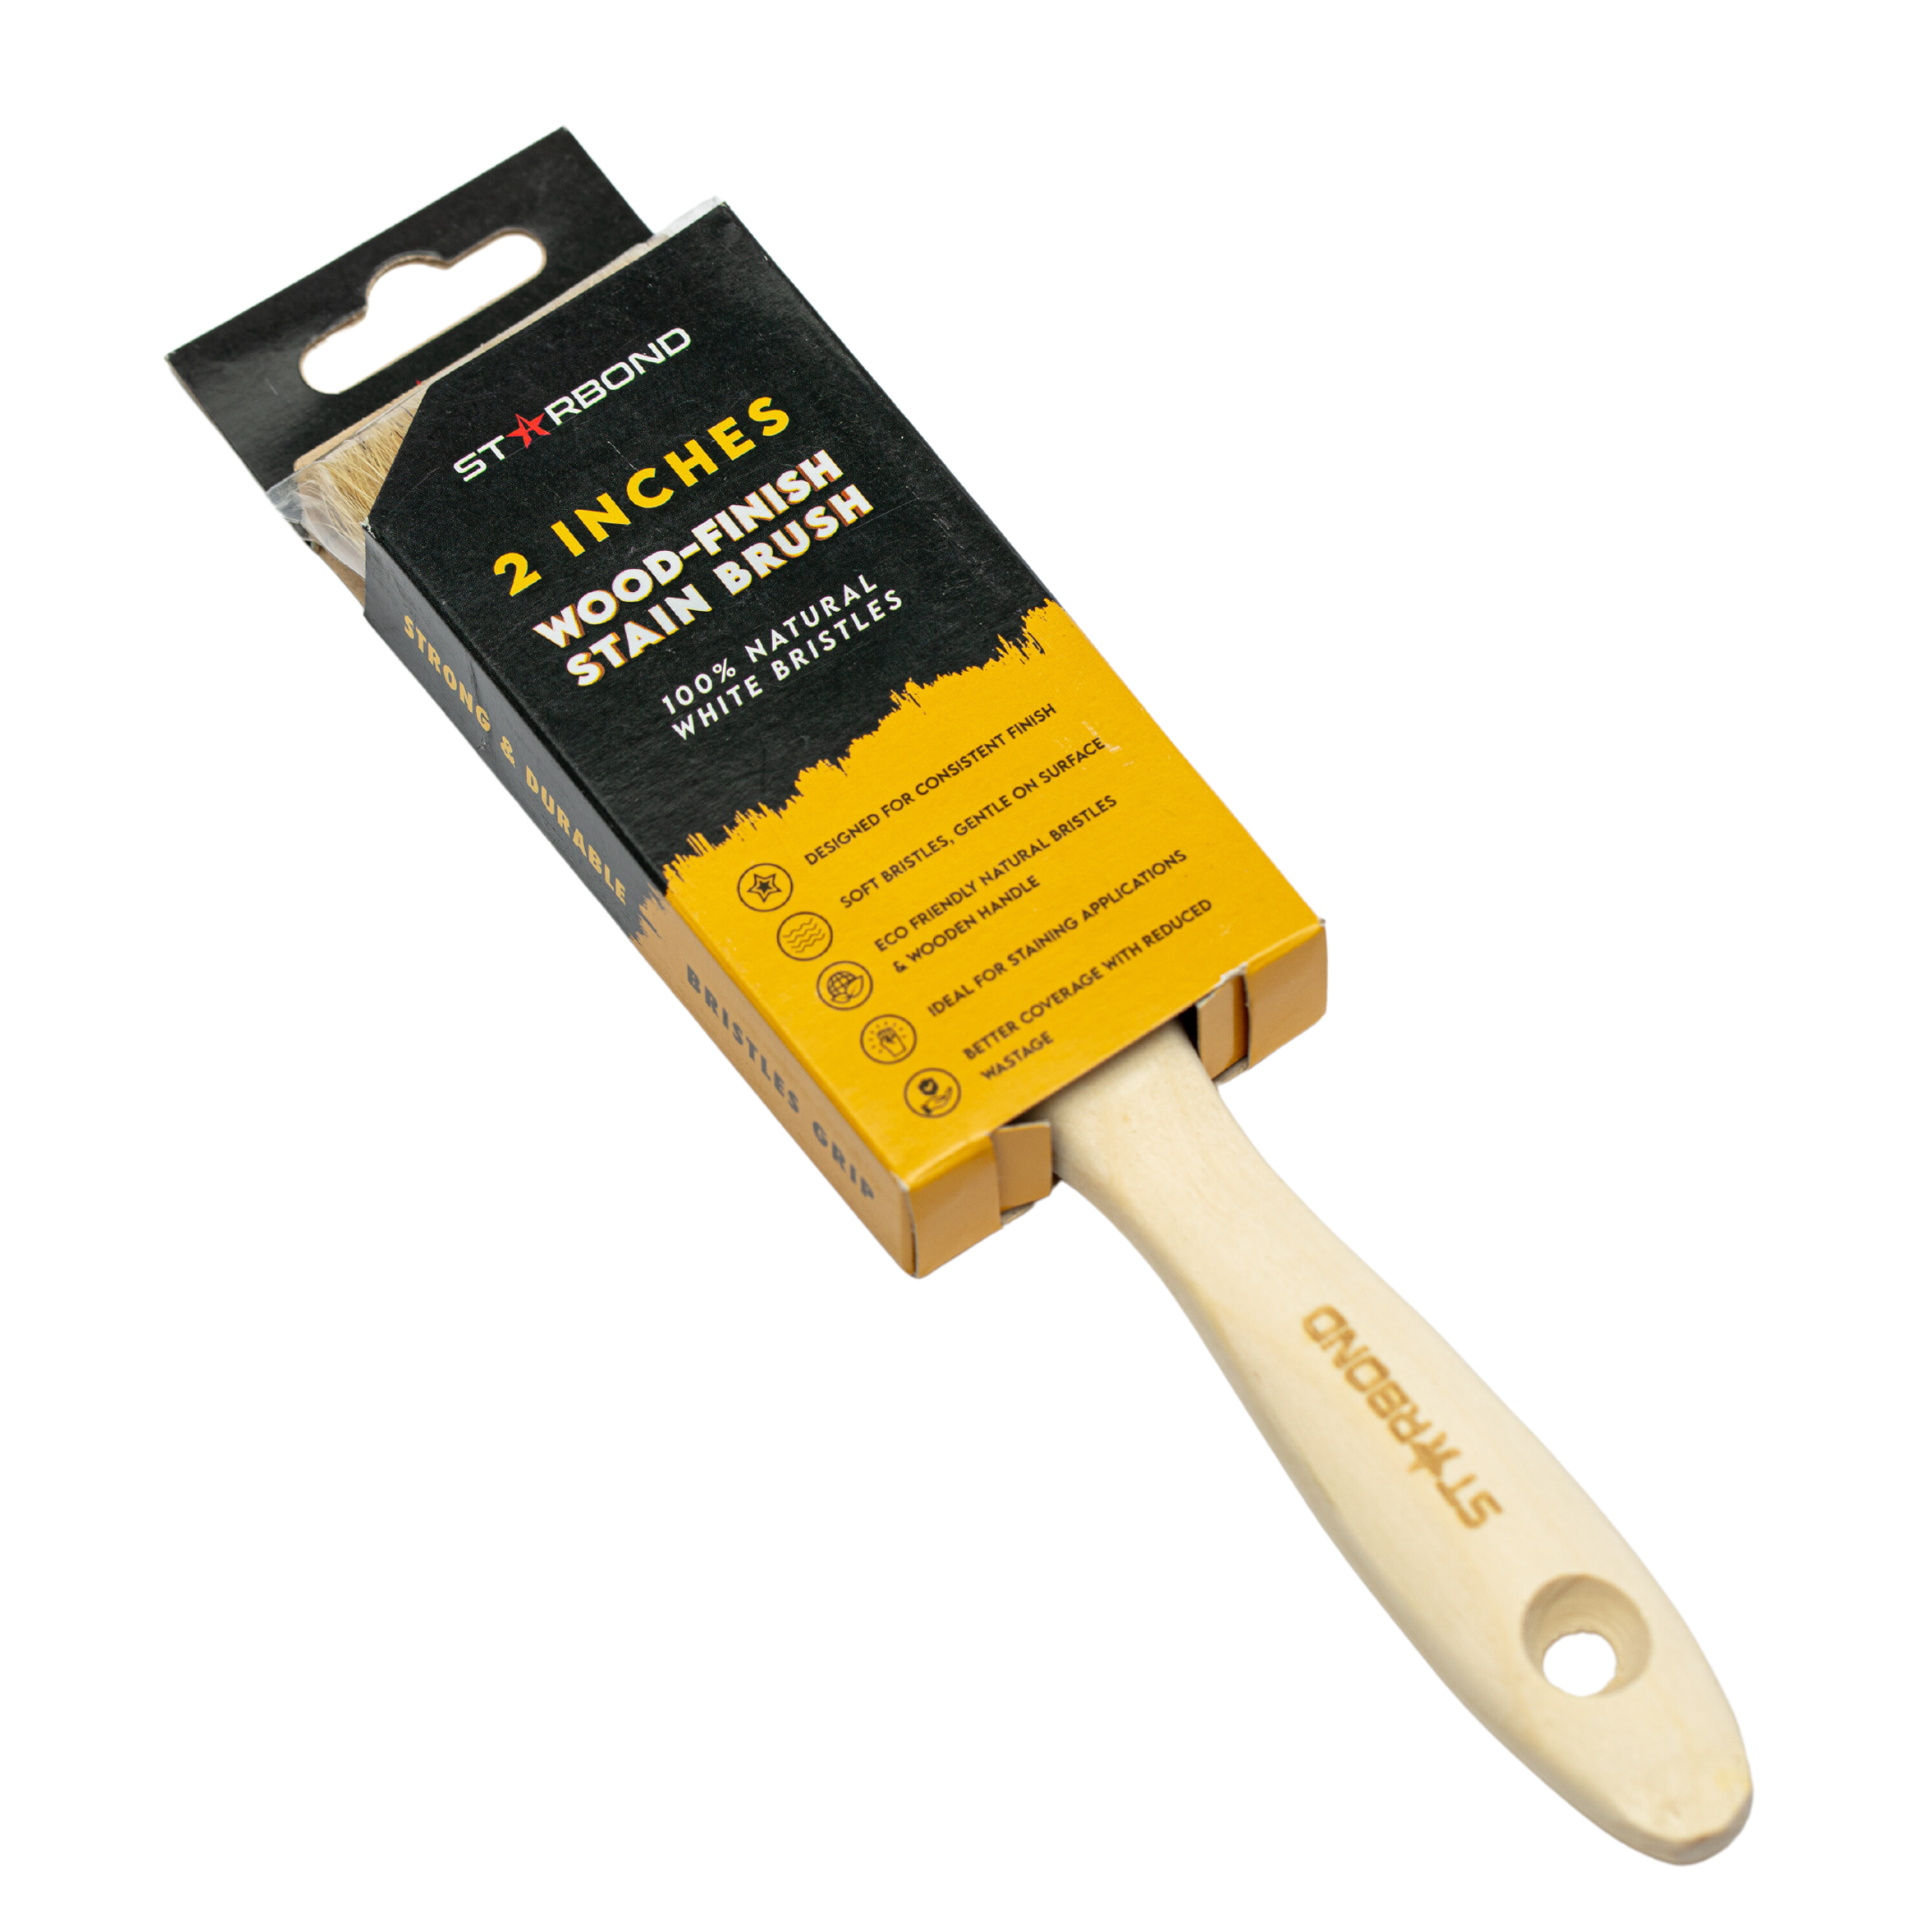 11 mm Brush with Cap Only, for Use with Glue Brush Can